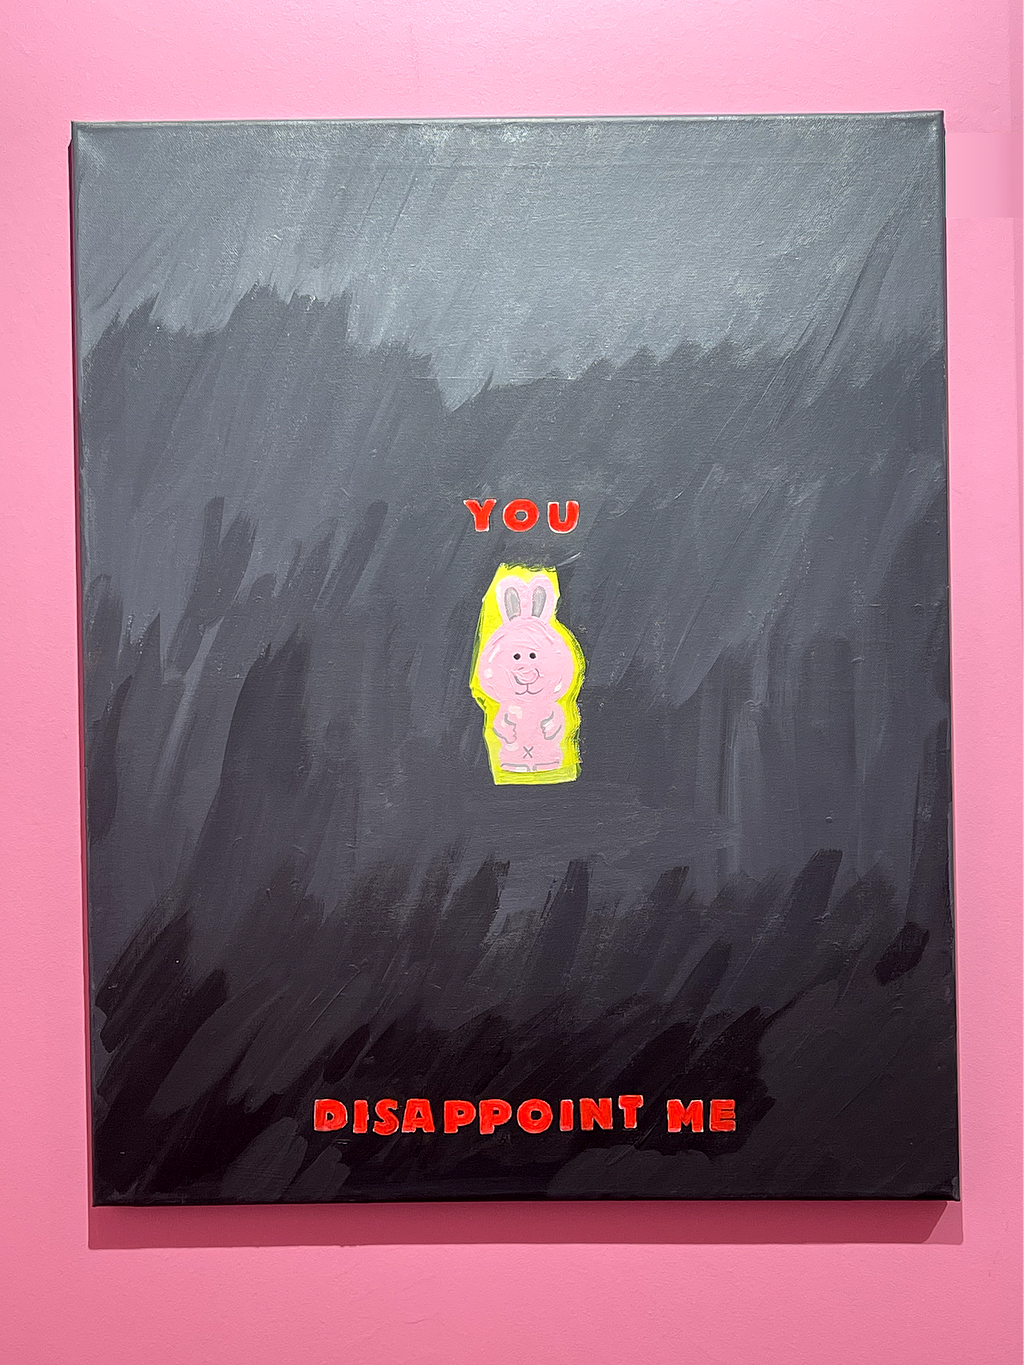 Piece of art saying “You disappoint me”